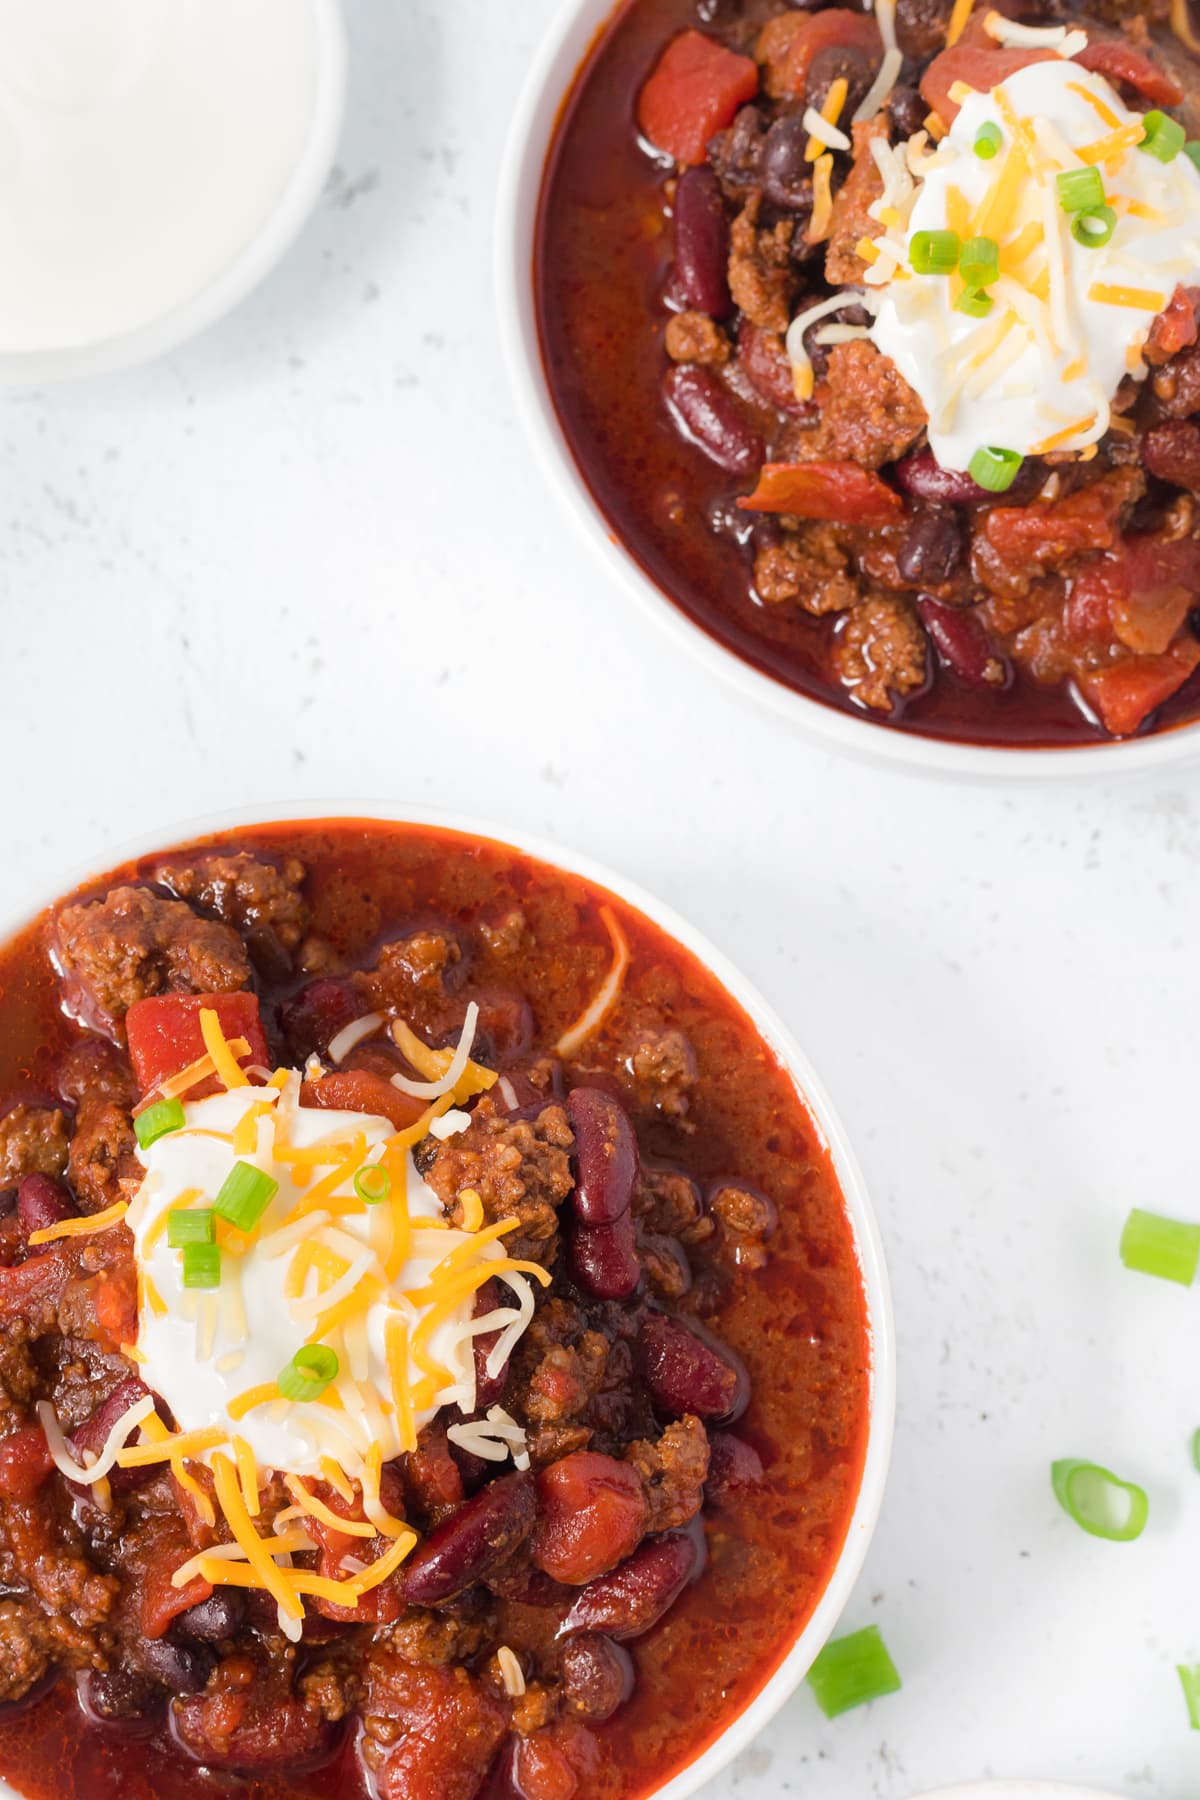 Two bowls of chili with garnish.